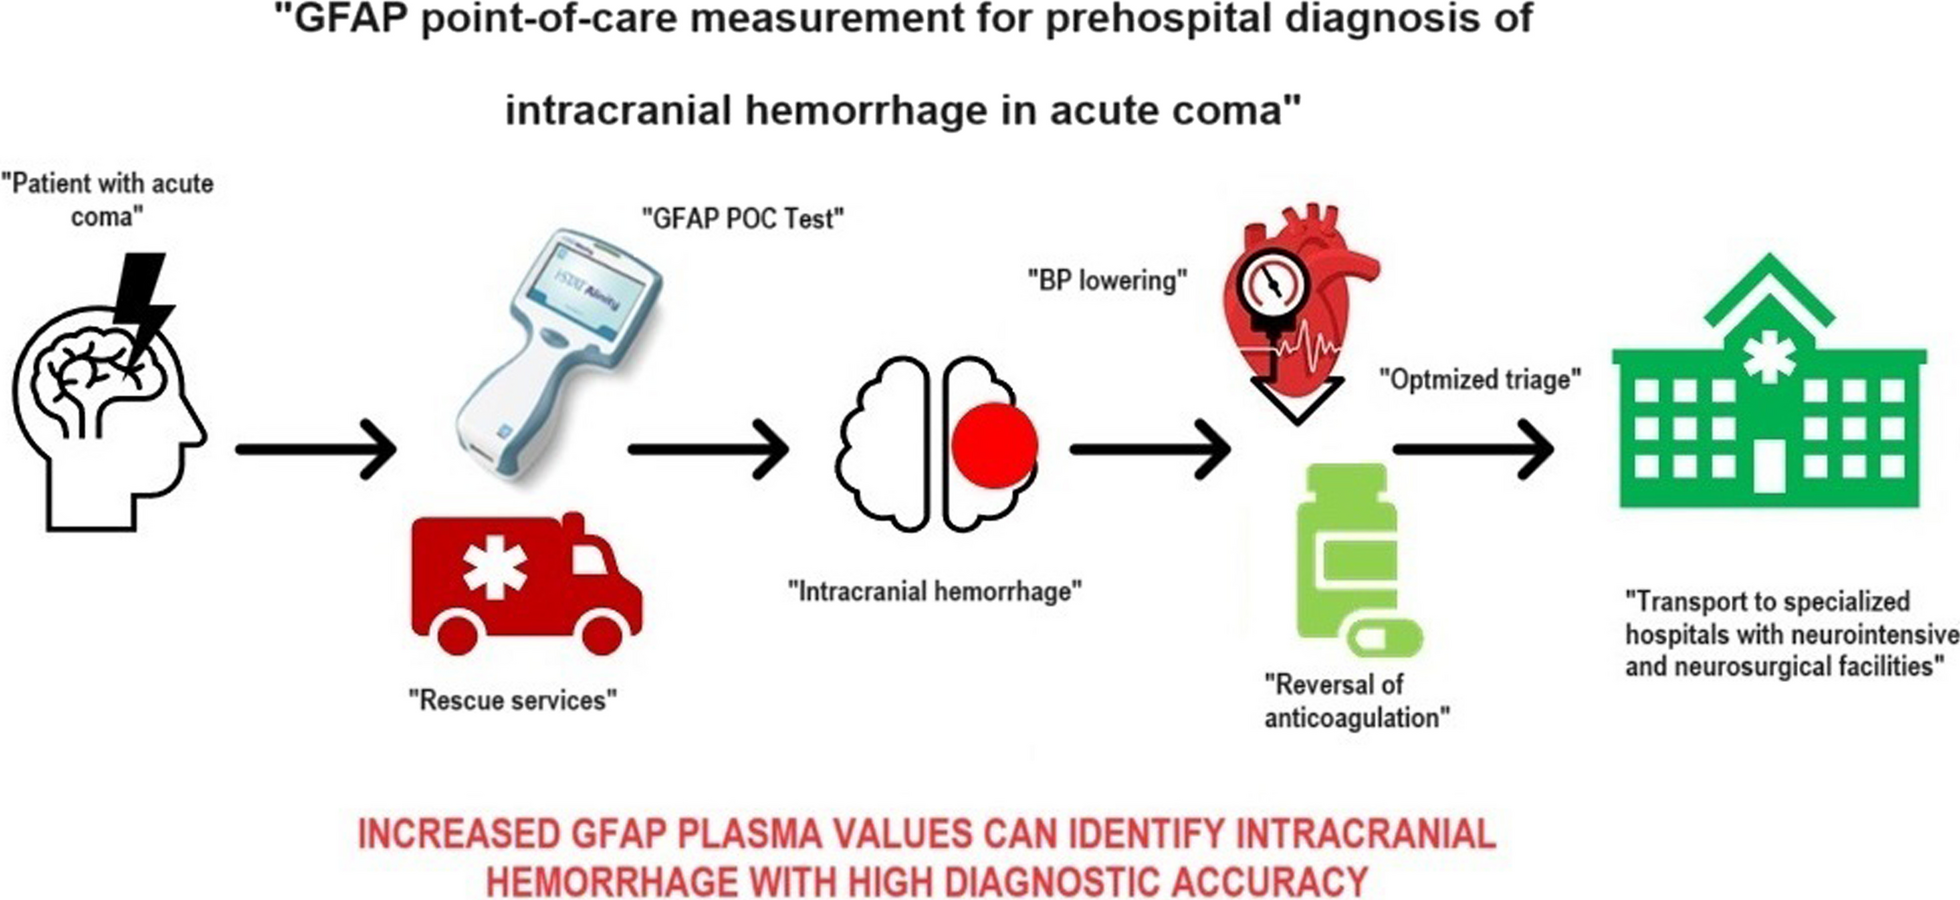 GFAP point-of-care measurement for prehospital diagnosis of intracranial hemorrhage in acute coma